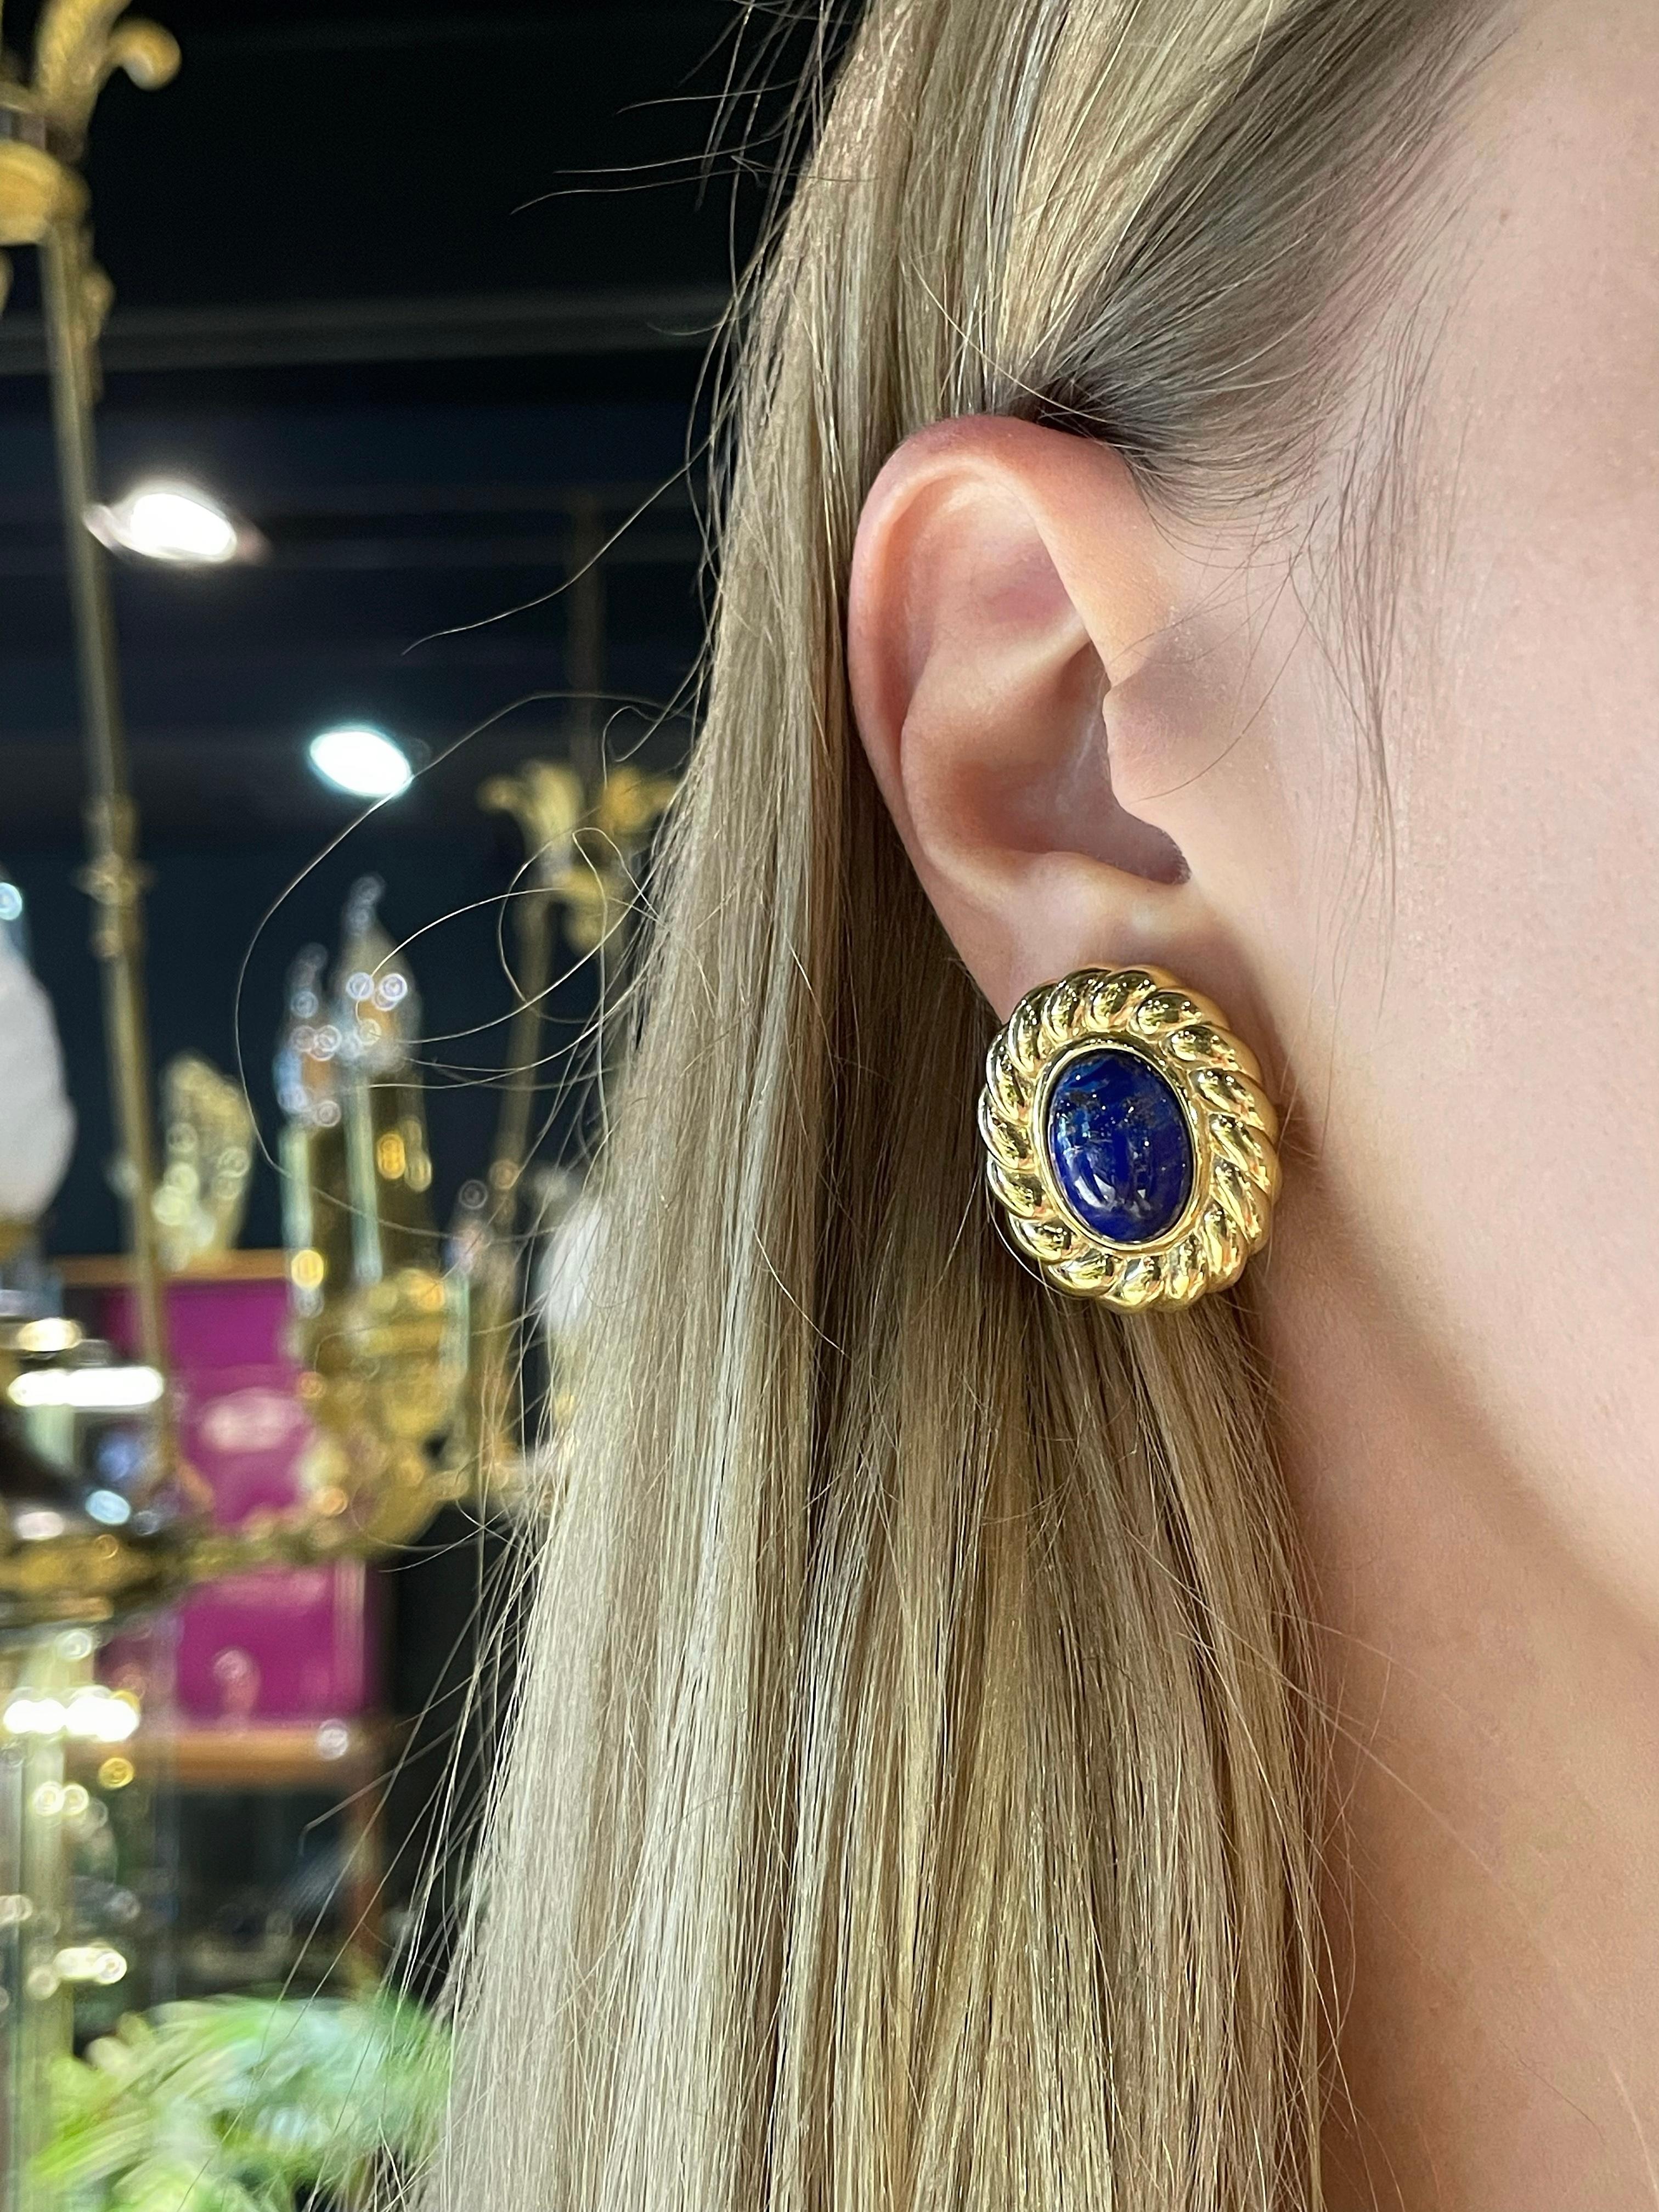 This is an oval clip on earrings designed by Christian Dior in 1980’s. The piece is gold plated, adorned with imitations of cabochon cut Lapis Lazuli. 

Markings: “Chr. Dior©Germany” (shown in photos).

Size: 2.5x2cm

———

If you have any questions,